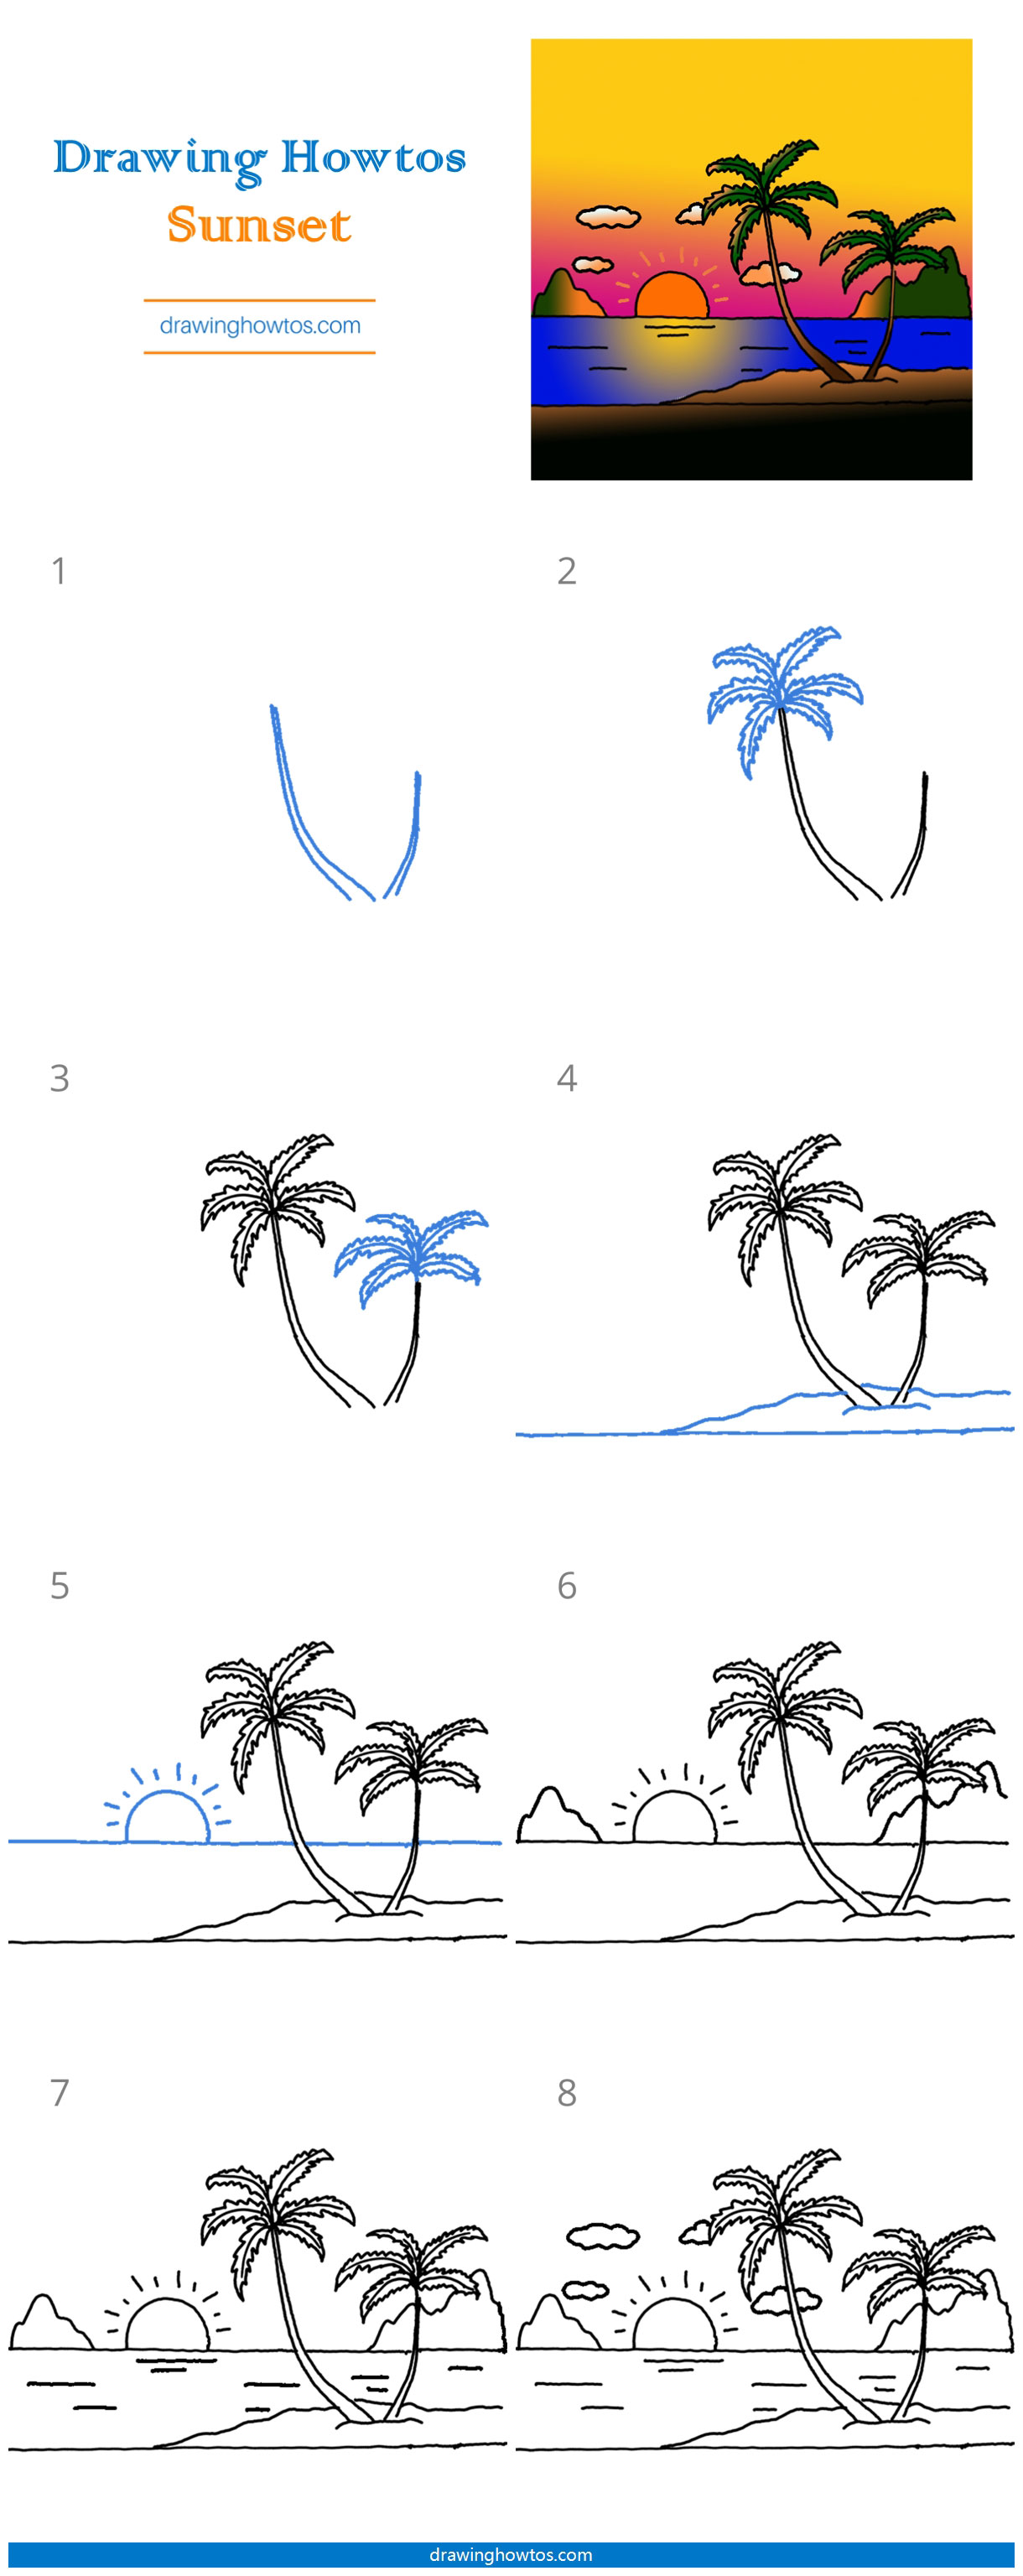 How to Draw a Sunset Step by Step